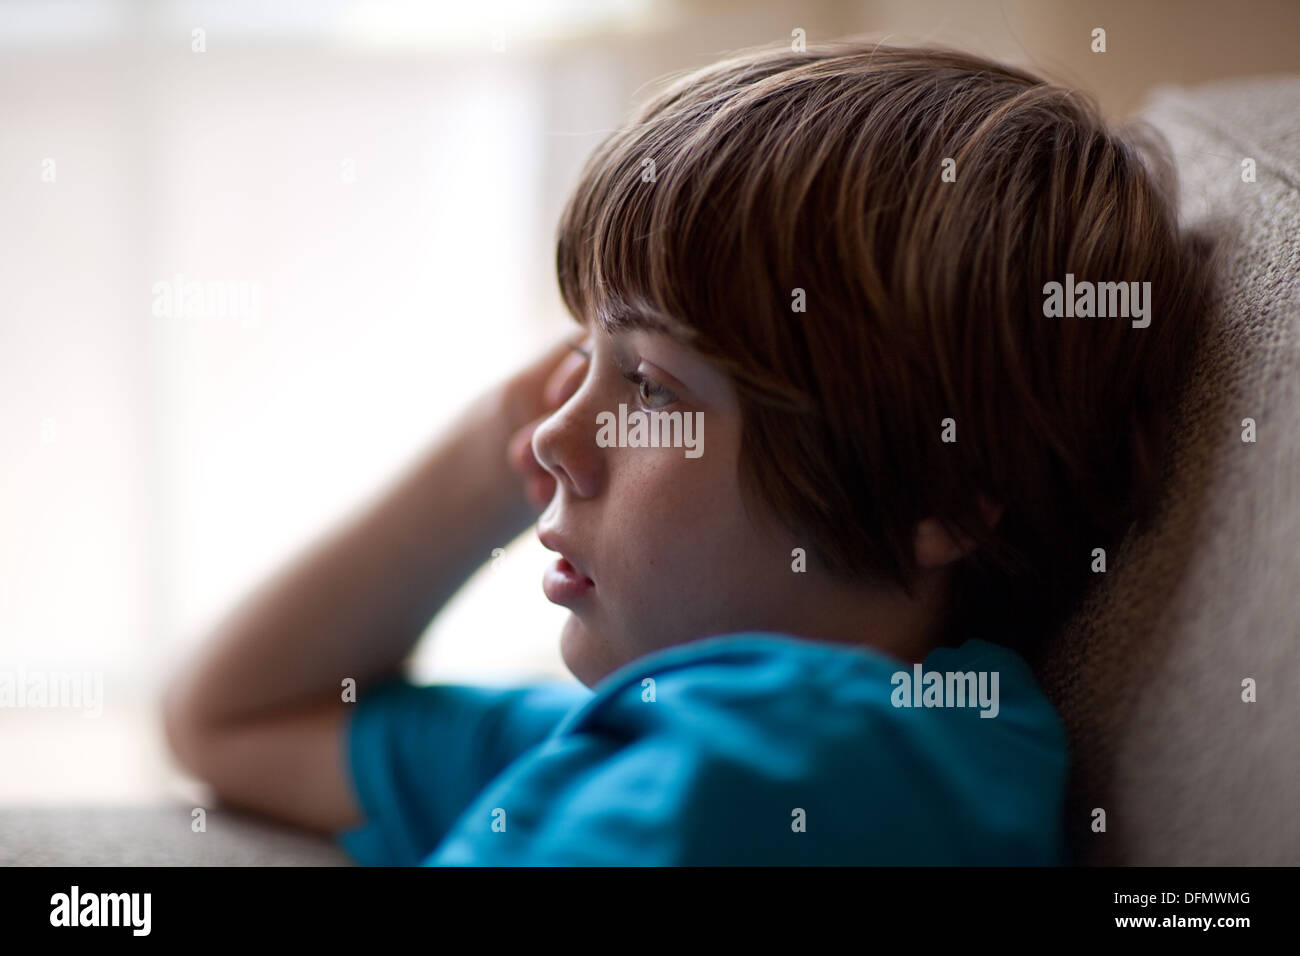 Profile of ten year old boy watching tv with blank, tired expression. Stock Photo